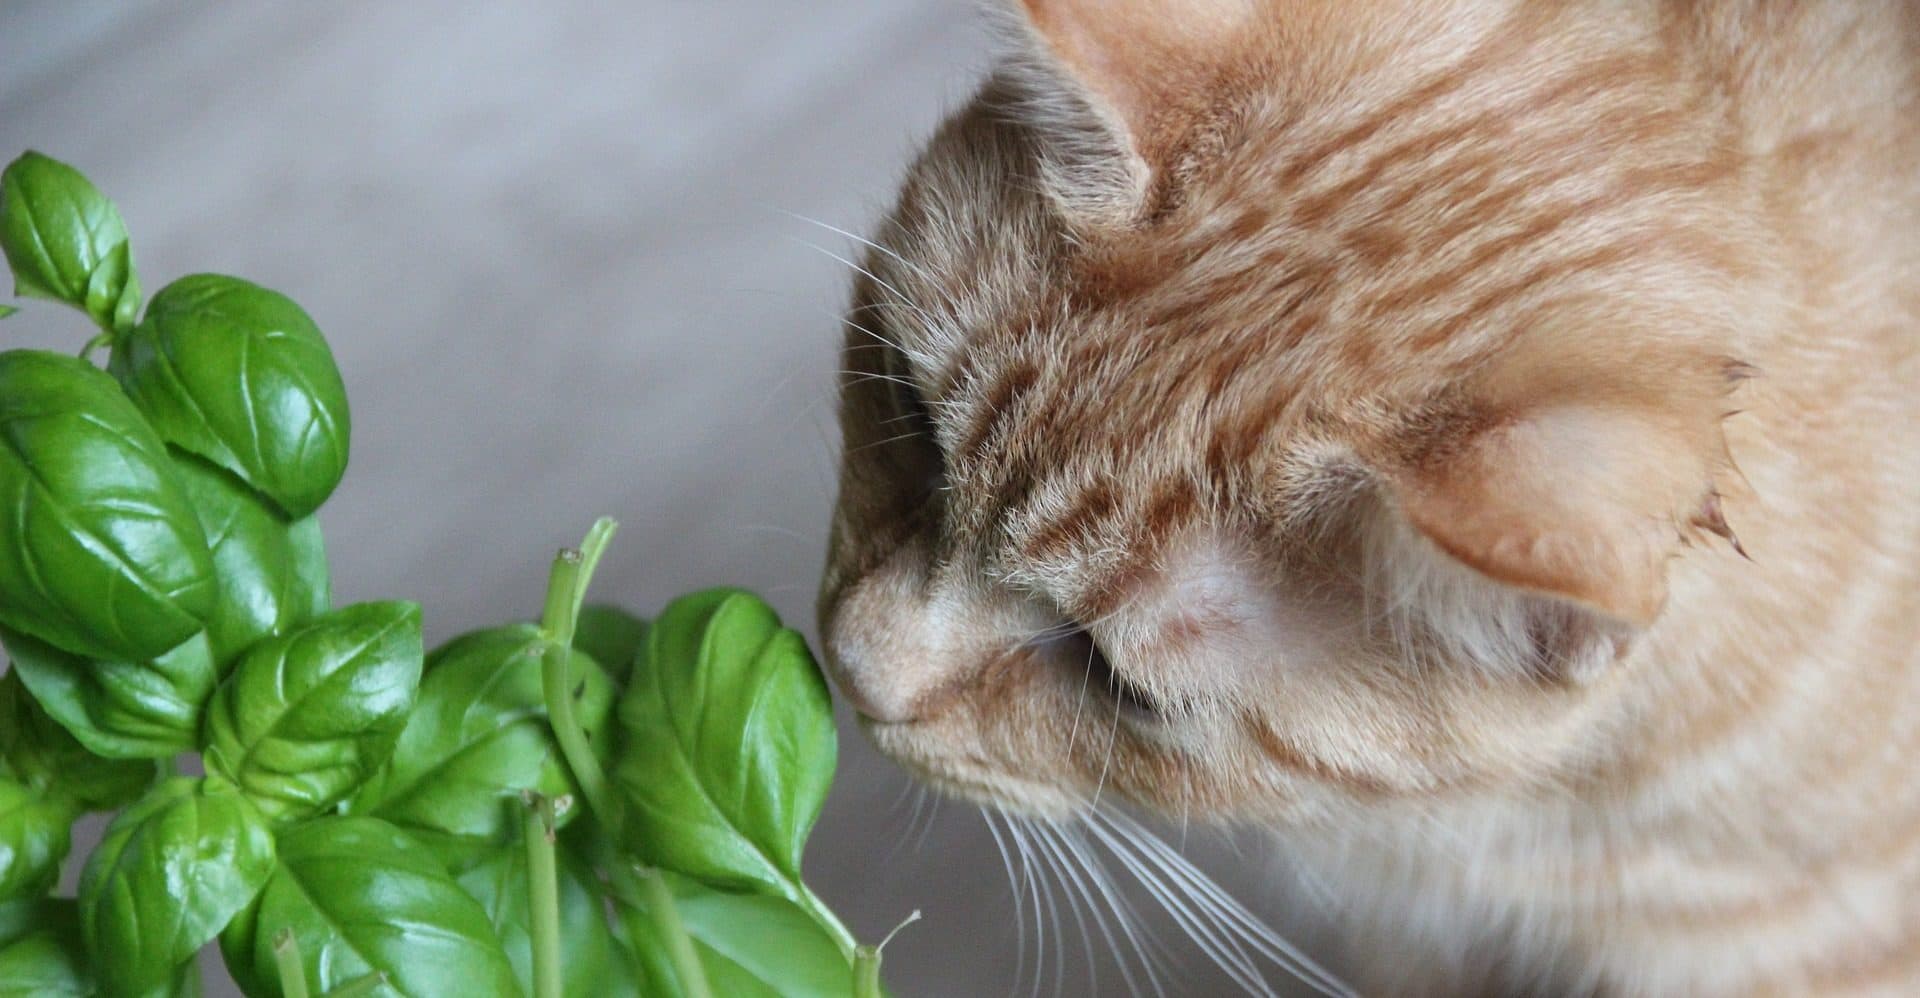 8 Surprisingly Common Plants That Are Toxic to Cats – Expert Advice From a Vet